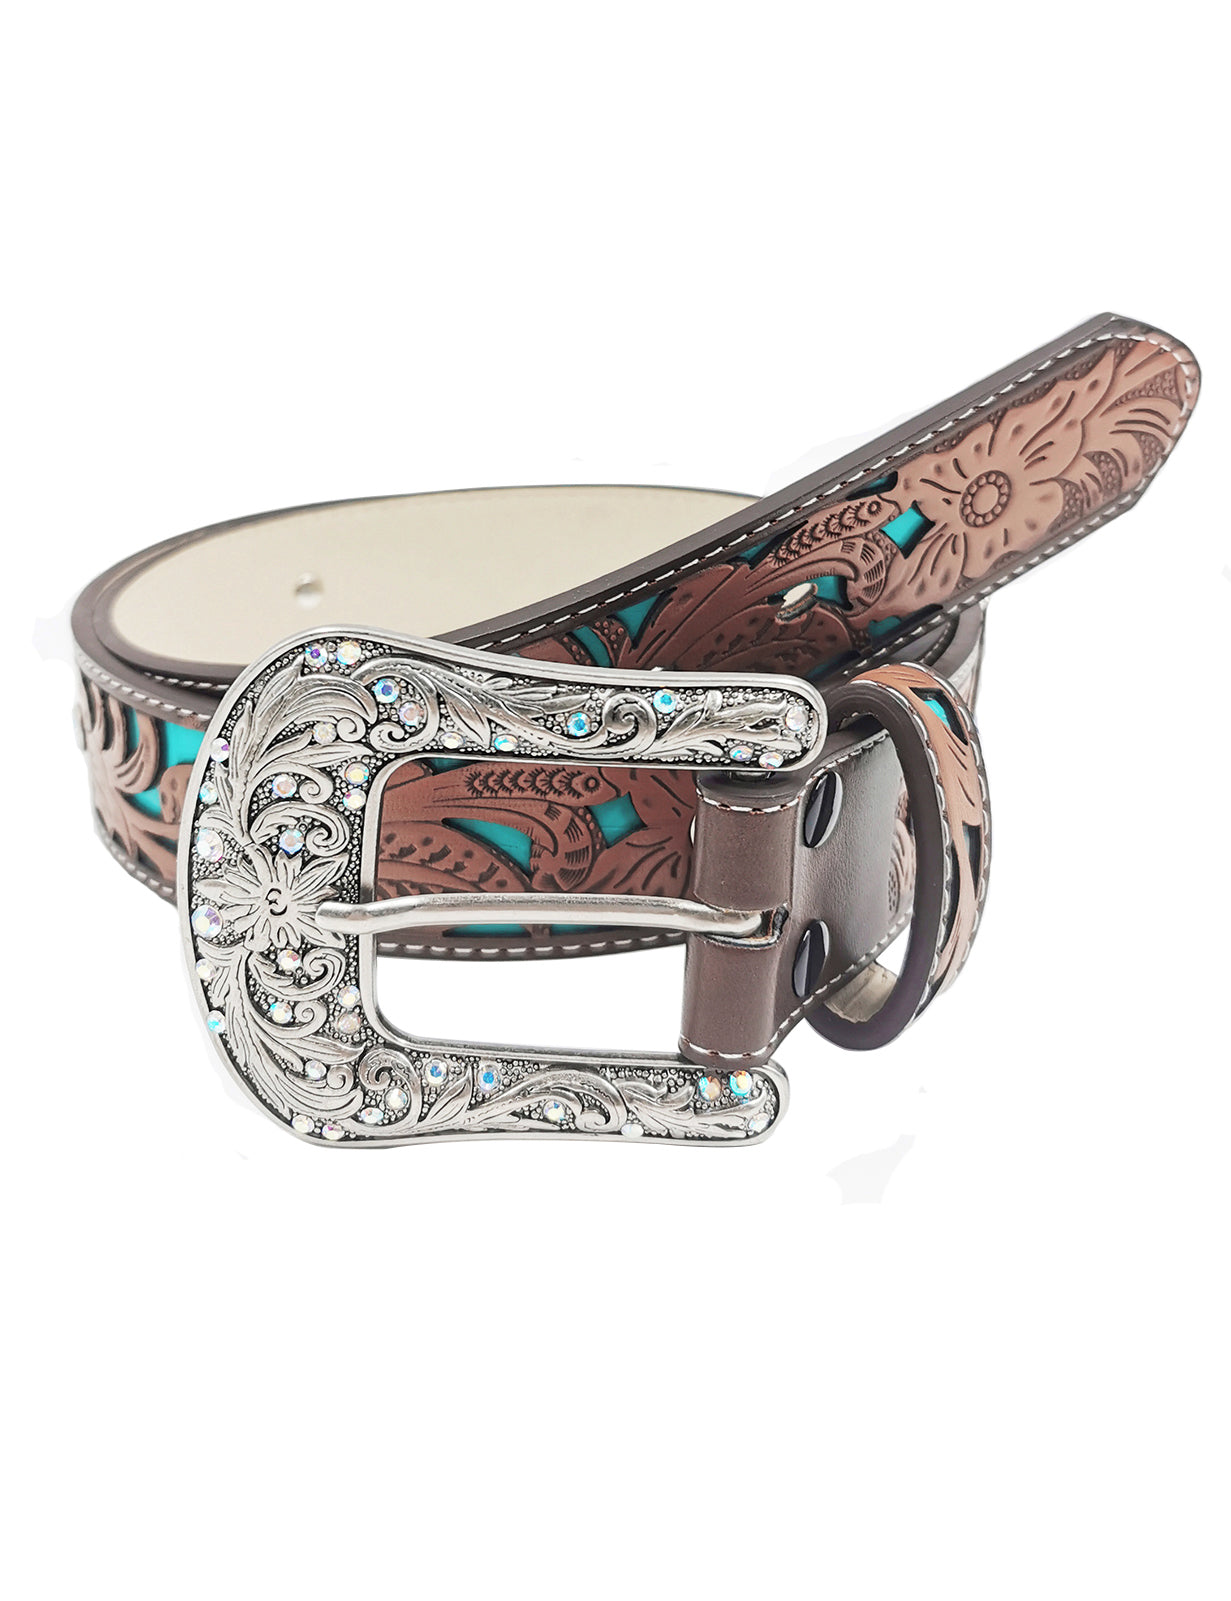 Topacc Western Turquoise Belts - Buckle with Block Longhorn(Free 1 Rhinestone Pin Buckle) / Fit waist:36-40in(91-101cm)